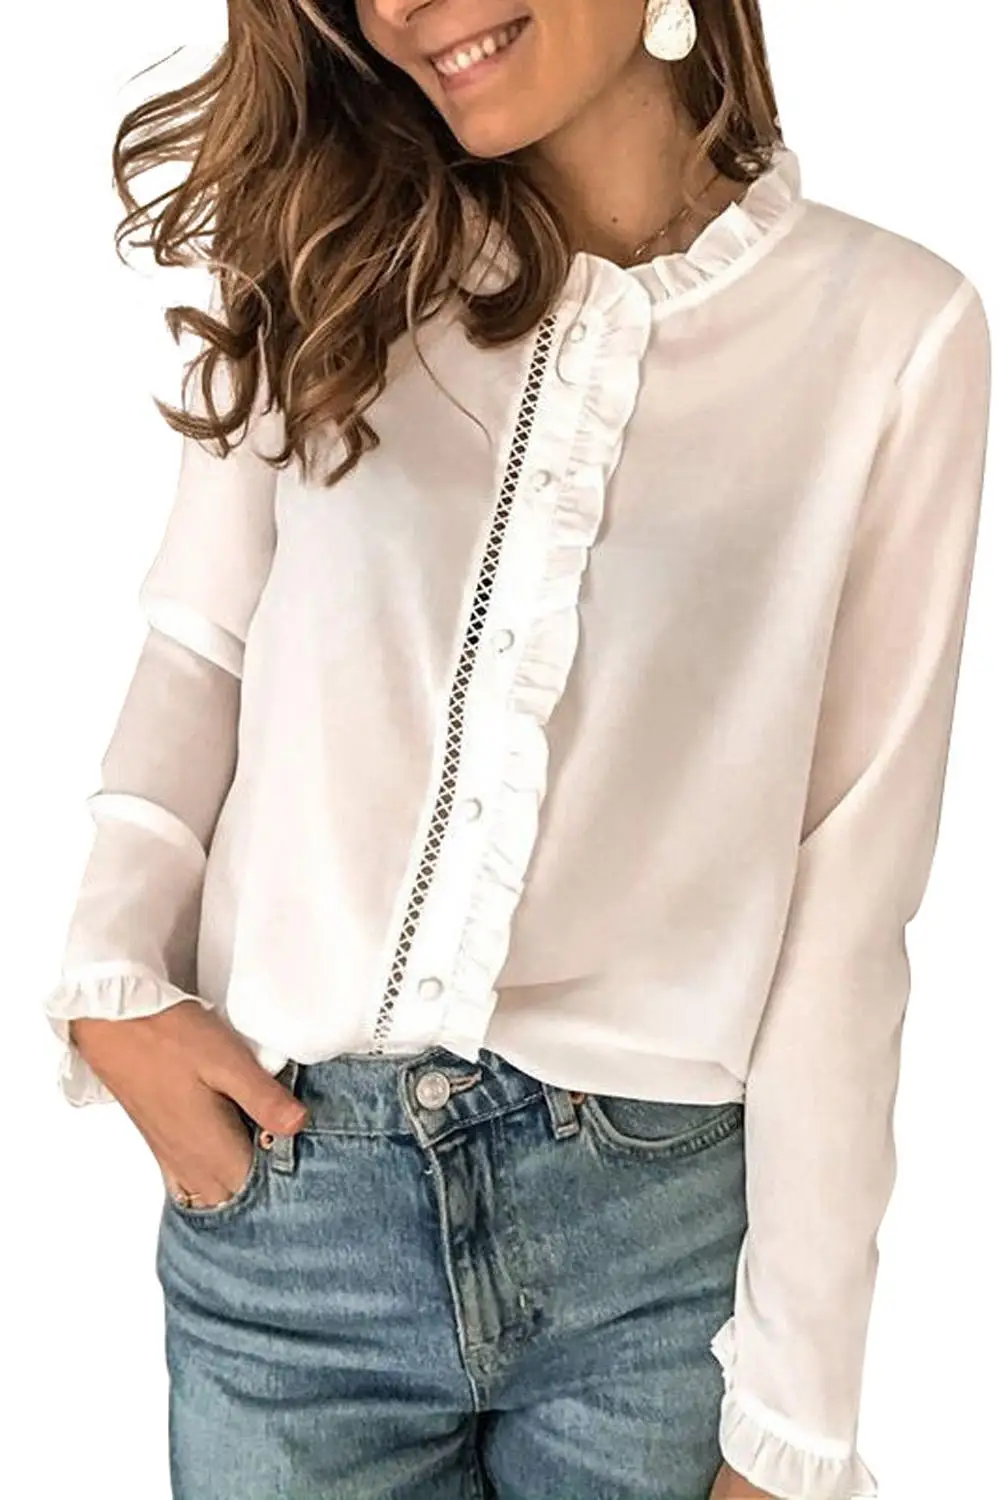 

Apricot Frilled Neckline Buttoned French Blouse Shirt Women Black White Solid O Neck Long Sleeve Sweat-Absorbing Elegant Tops